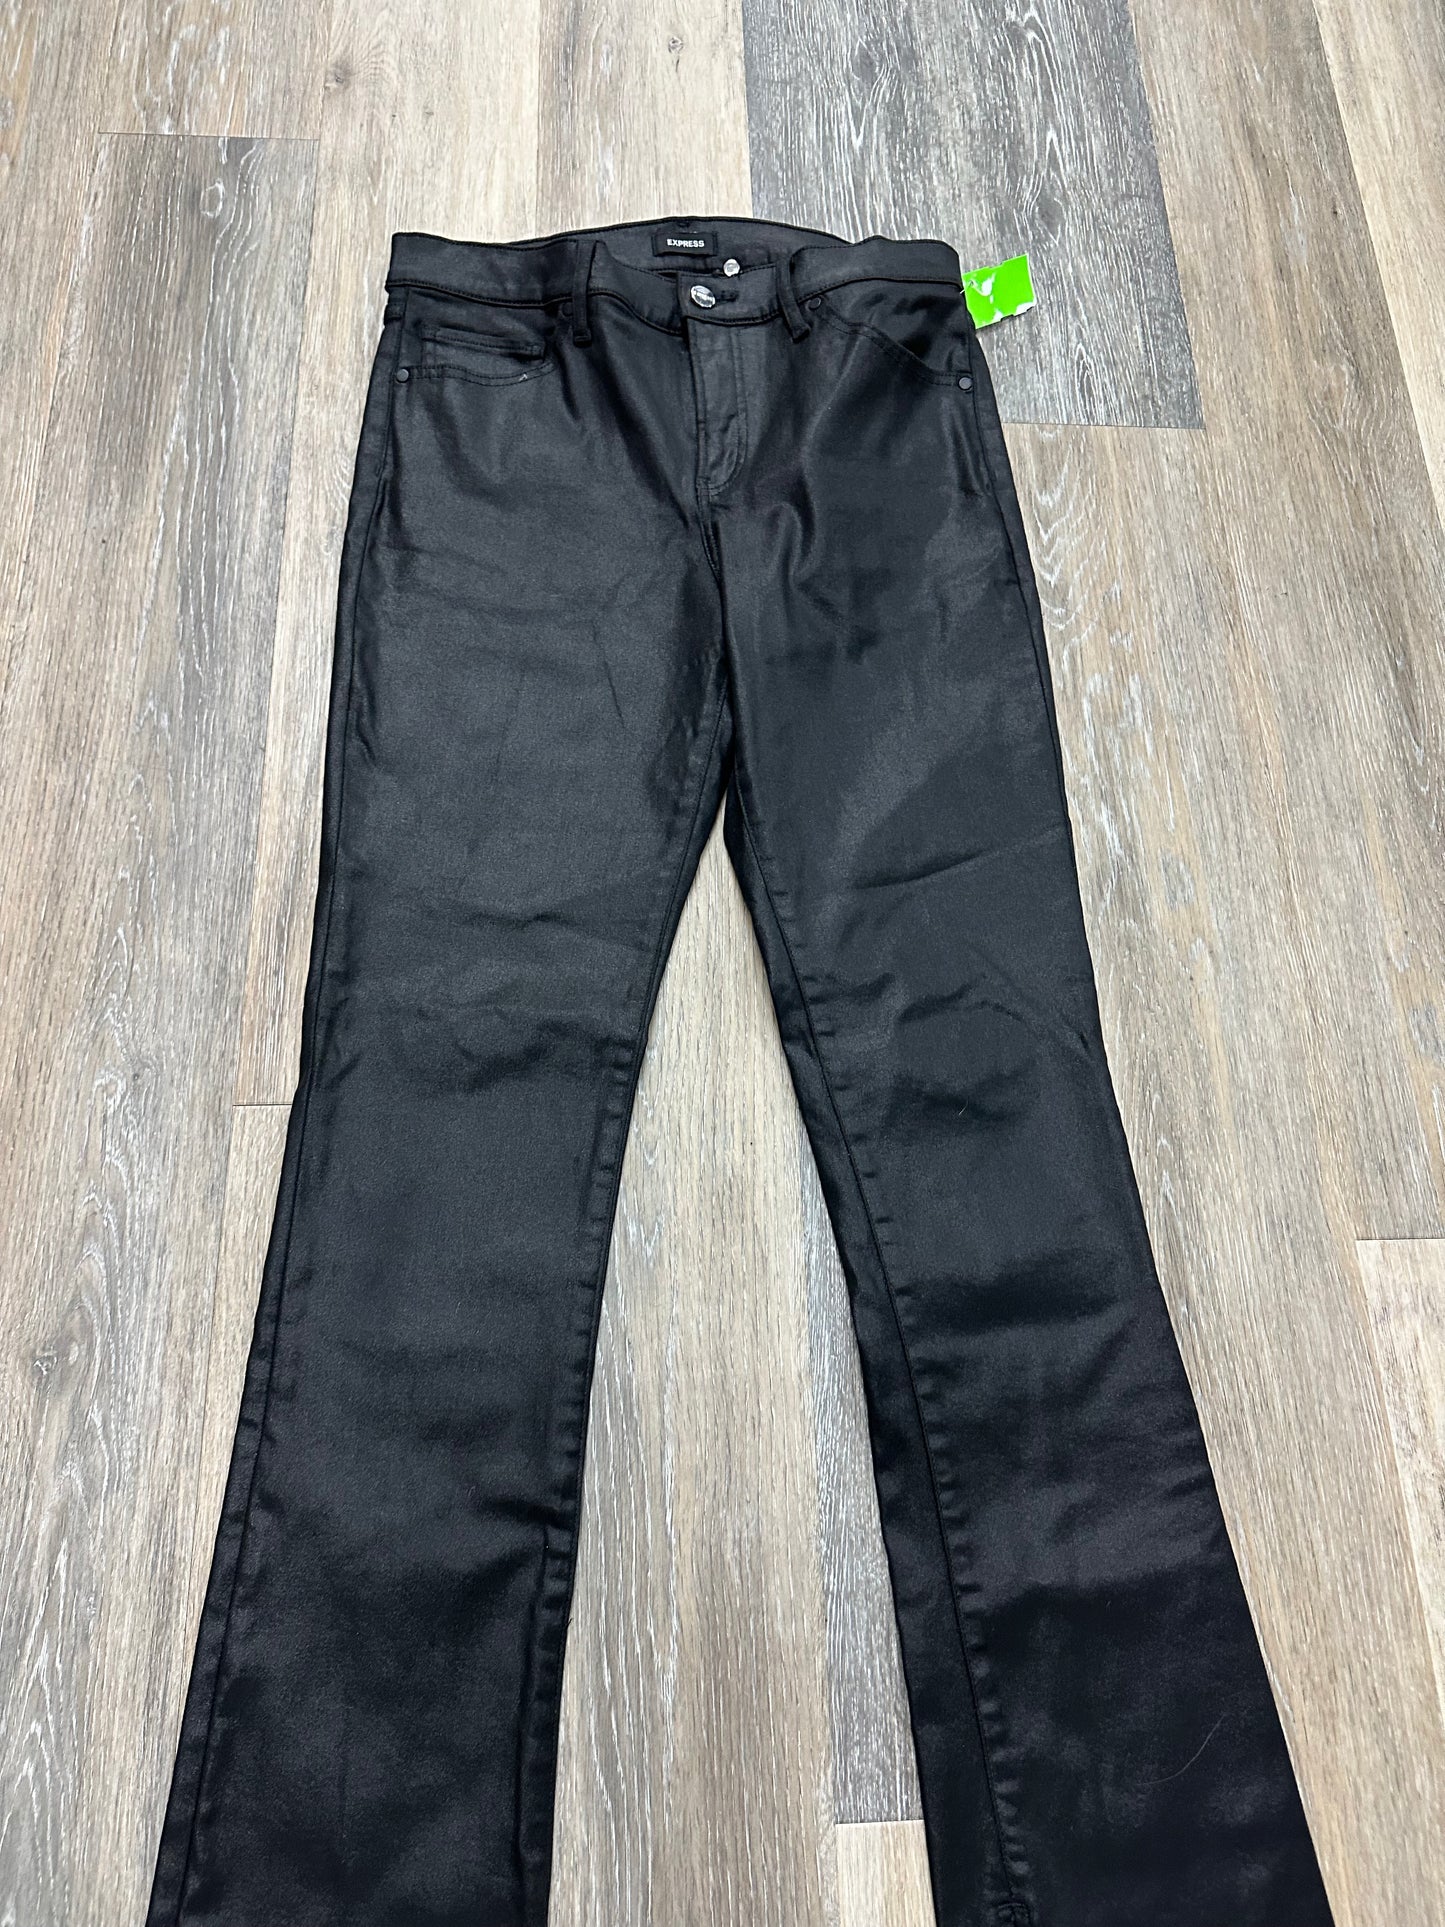 Pants Ankle By Express  Size: 10